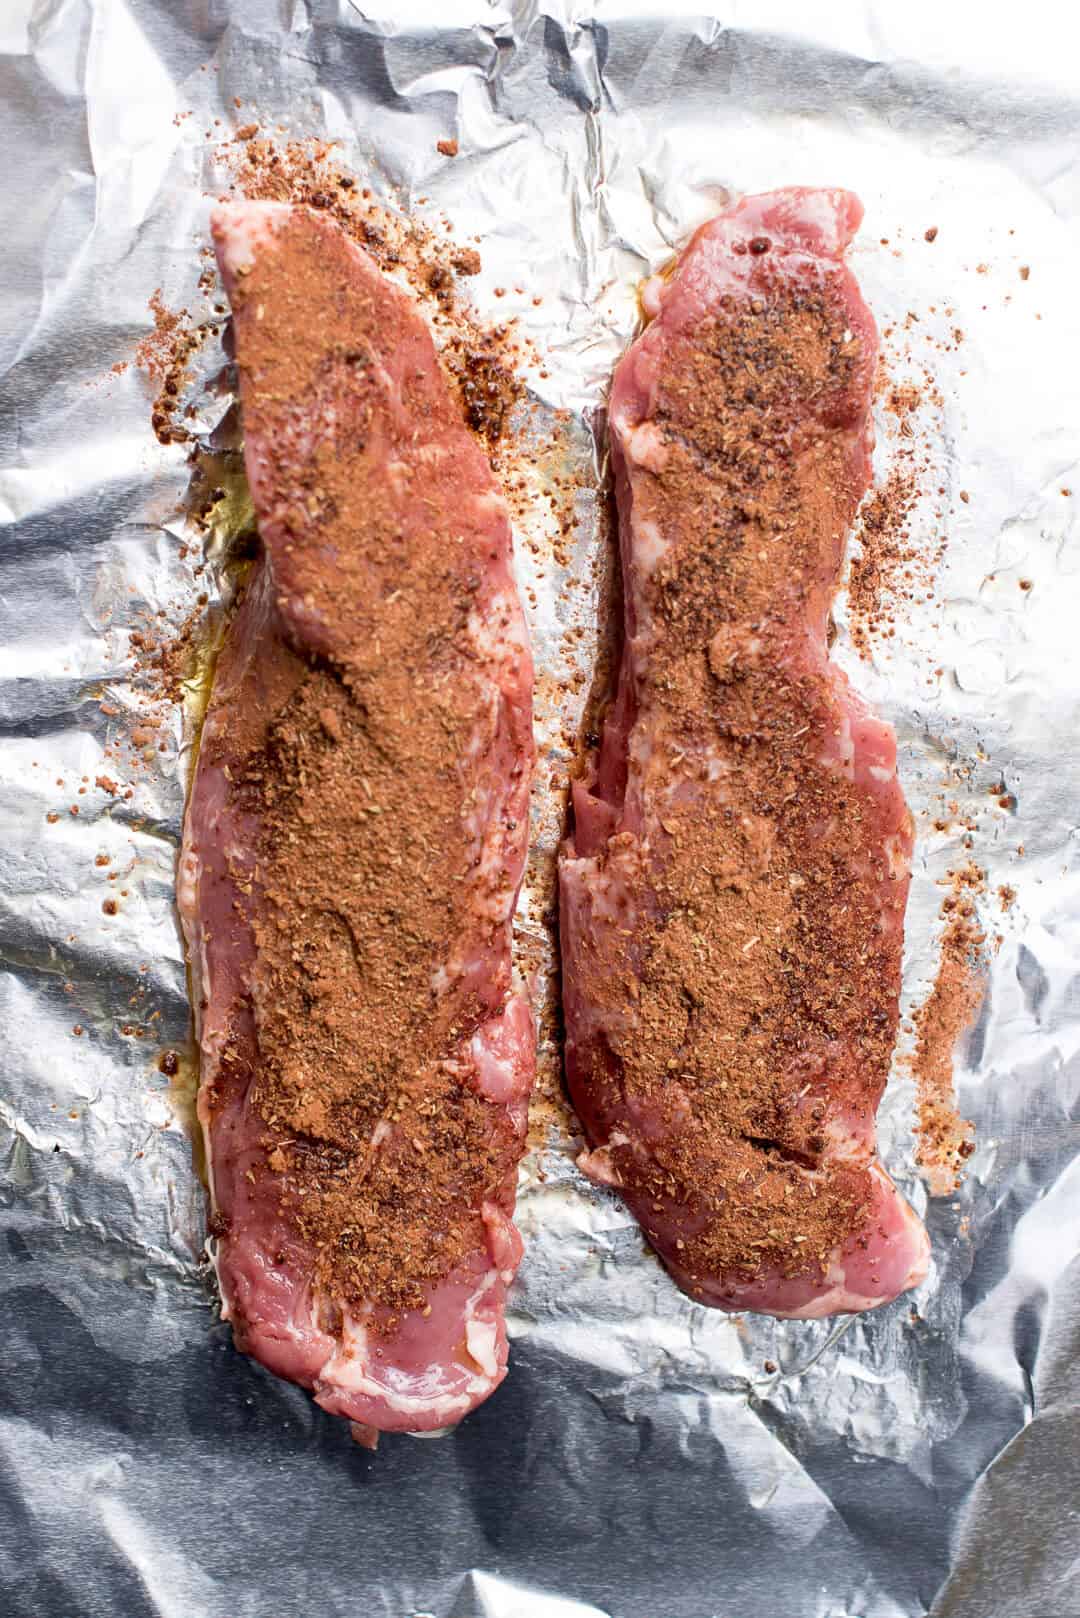 An in process image showing two tenderloins coated with the spice mixture.